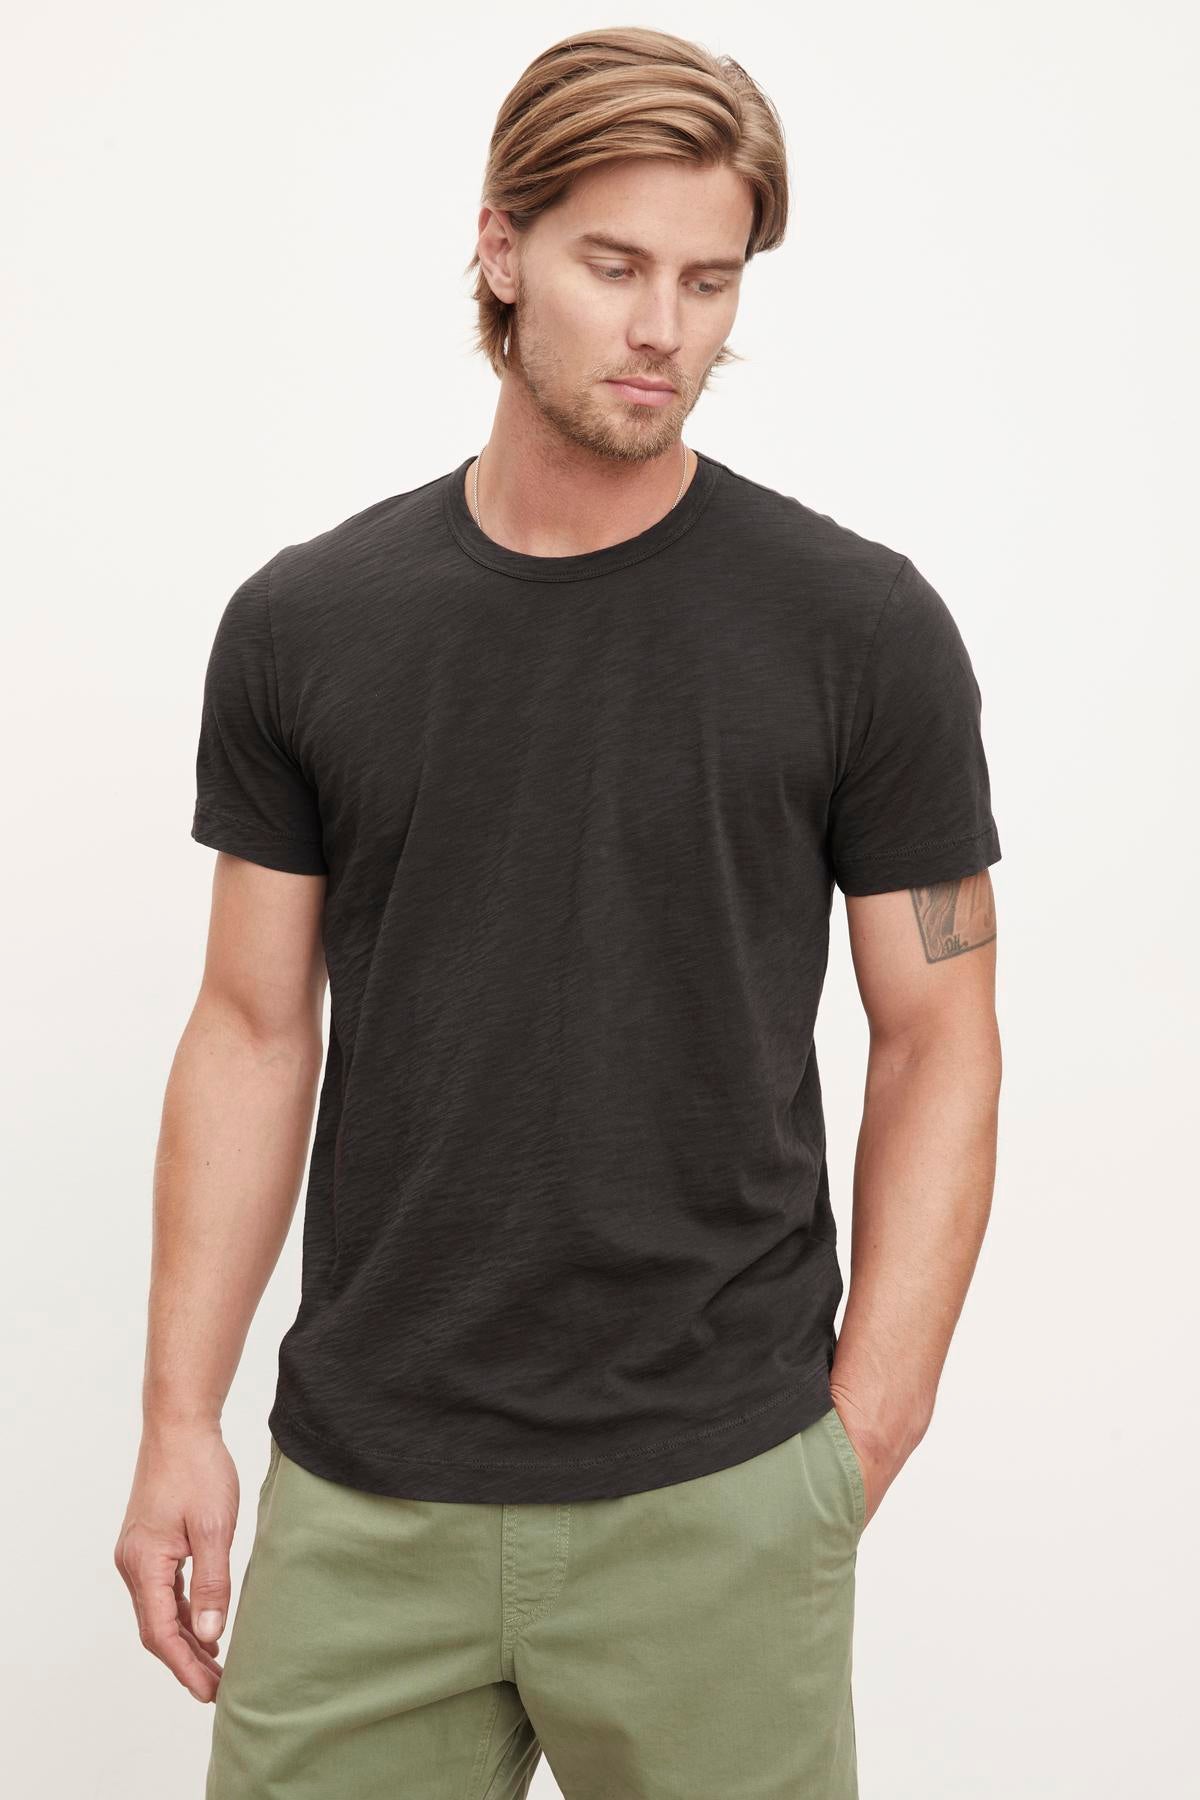 Man wearing a Velvet by Graham & Spencer heathered texture, dark grey AMARO TEE crew neck t-shirt and green pants.-36299660099777